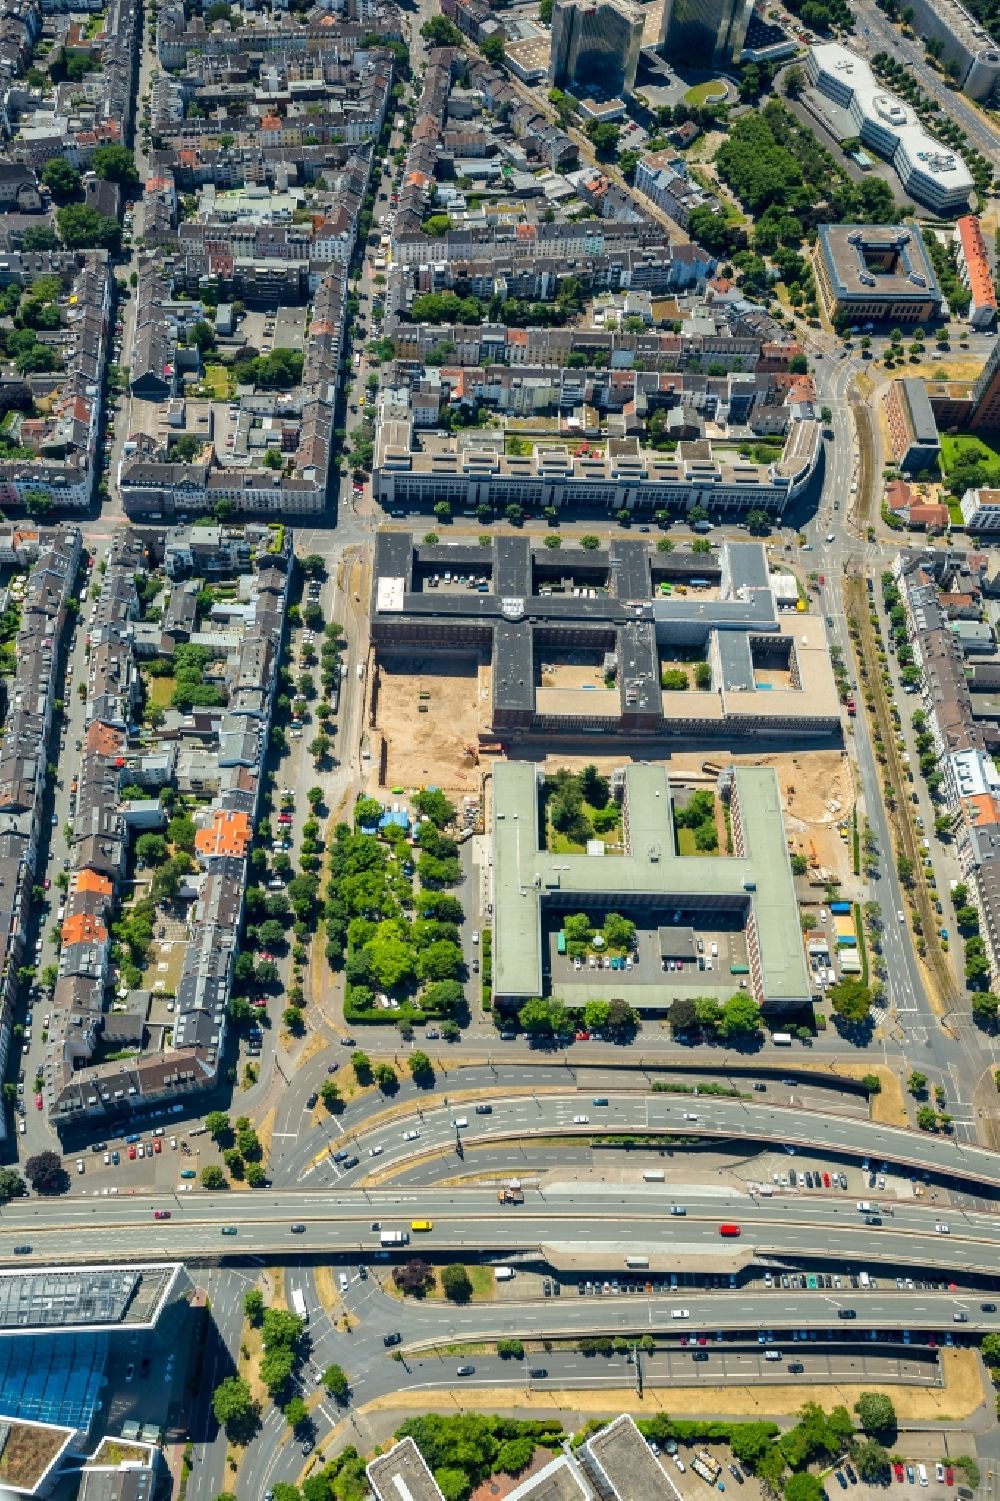 Düsseldorf from above - Redevelopment works at the police department and ministry for Bauen und Wohnen on Hubertusstrasse in Duesseldorf in the state of North Rhine-Westphalia